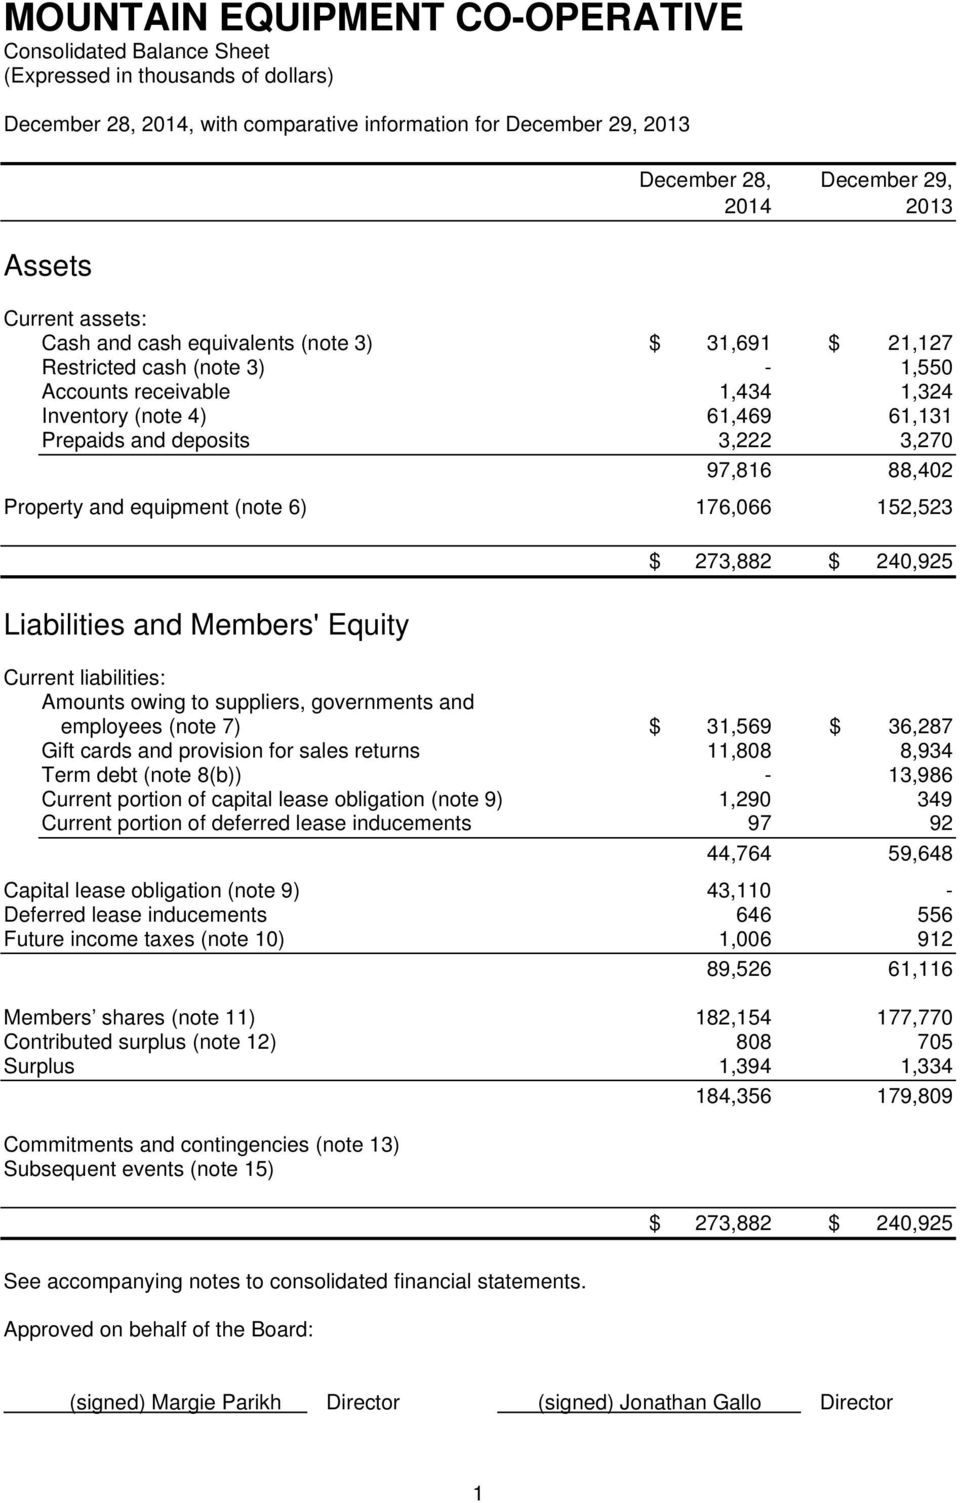 152,523 Liabilities and Members' Equity $ 273,882 $ 240,925 Current liabilities: Amounts owing to suppliers, governments and employees (note 7) $ 31,569 $ 36,287 Gift cards and provision for sales